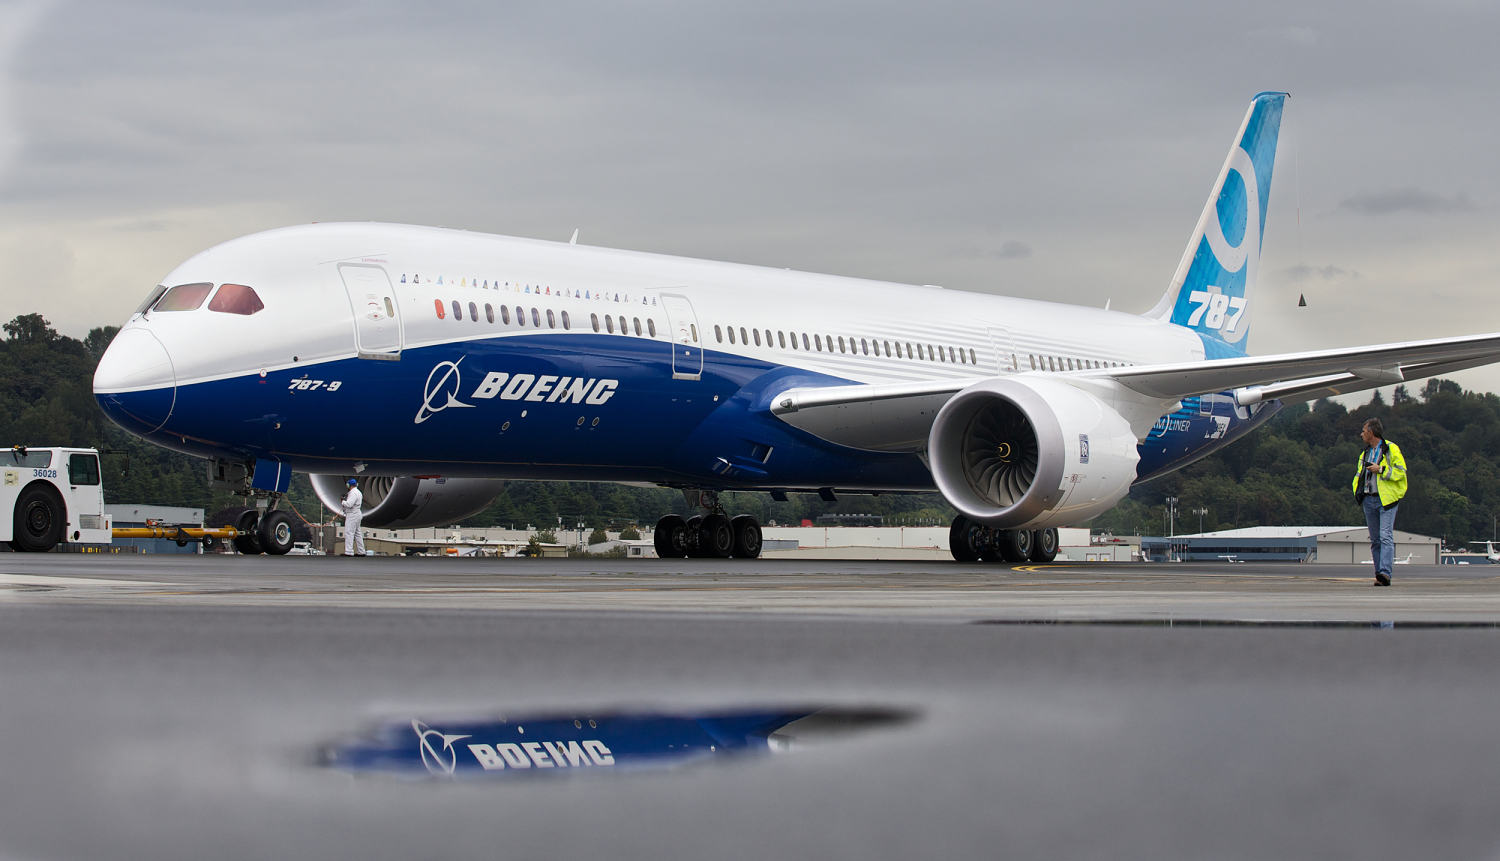 Boeing whistleblower says the Dreamliner 787 could 'break apart' because of safety flaws, report says